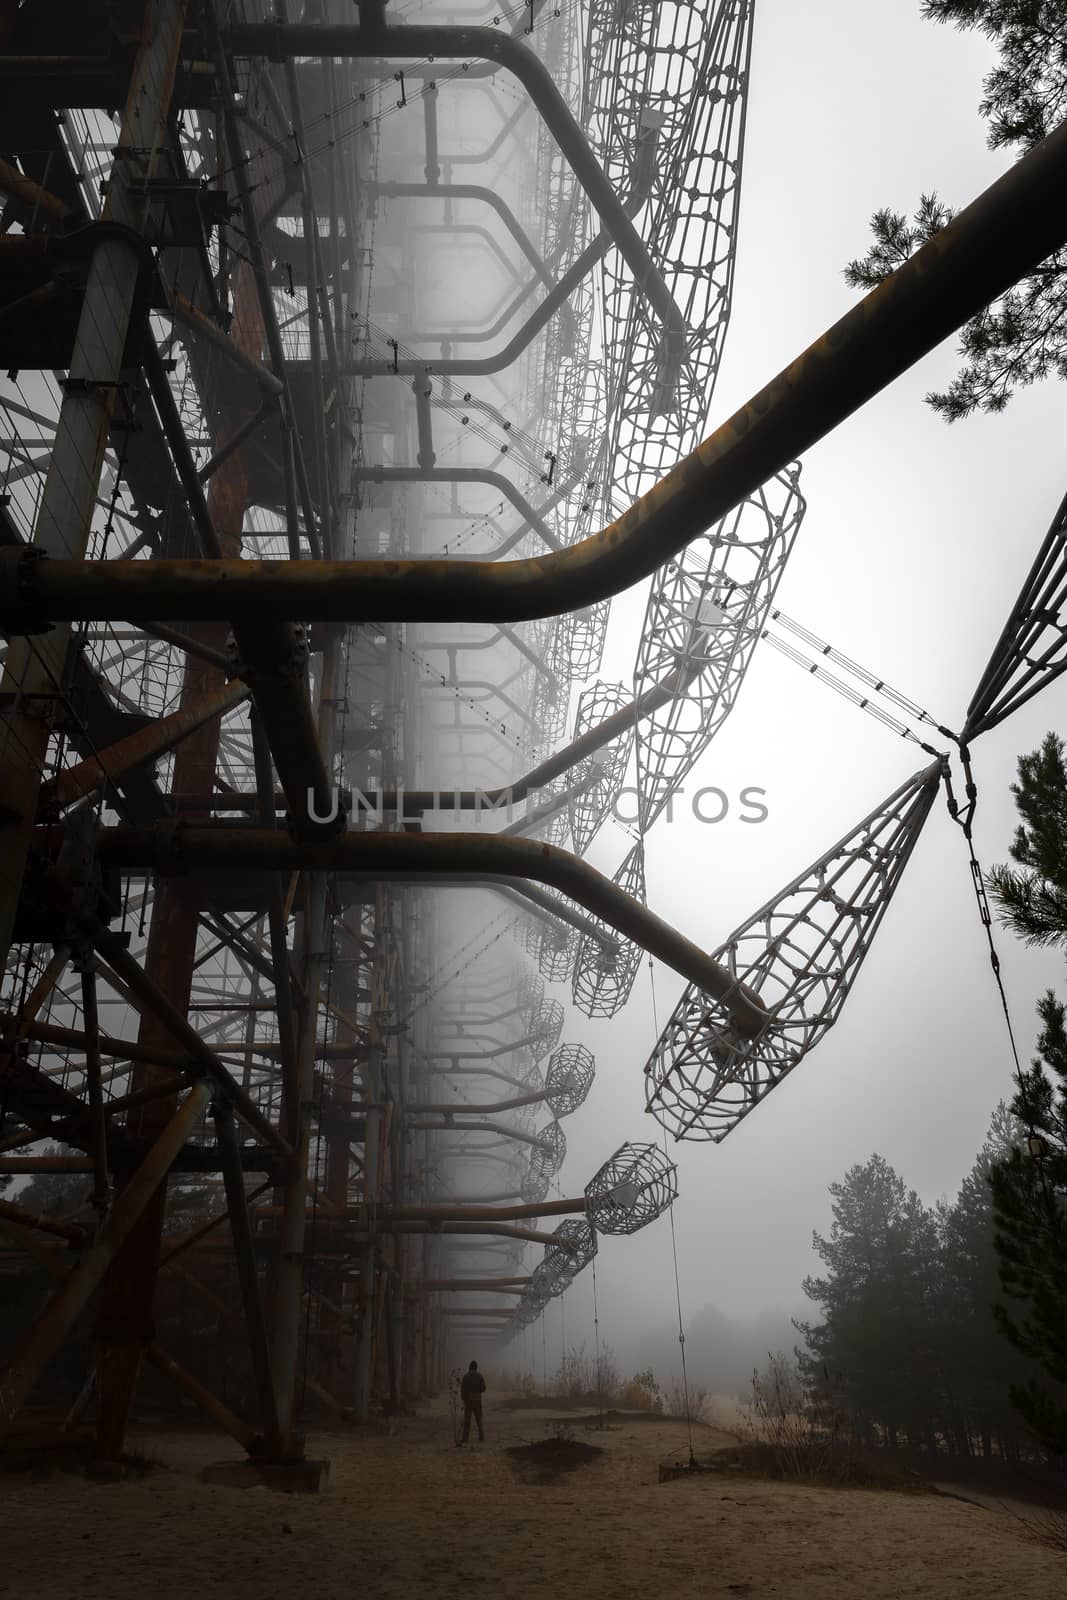 Large antenna complex in the mist by svedoliver